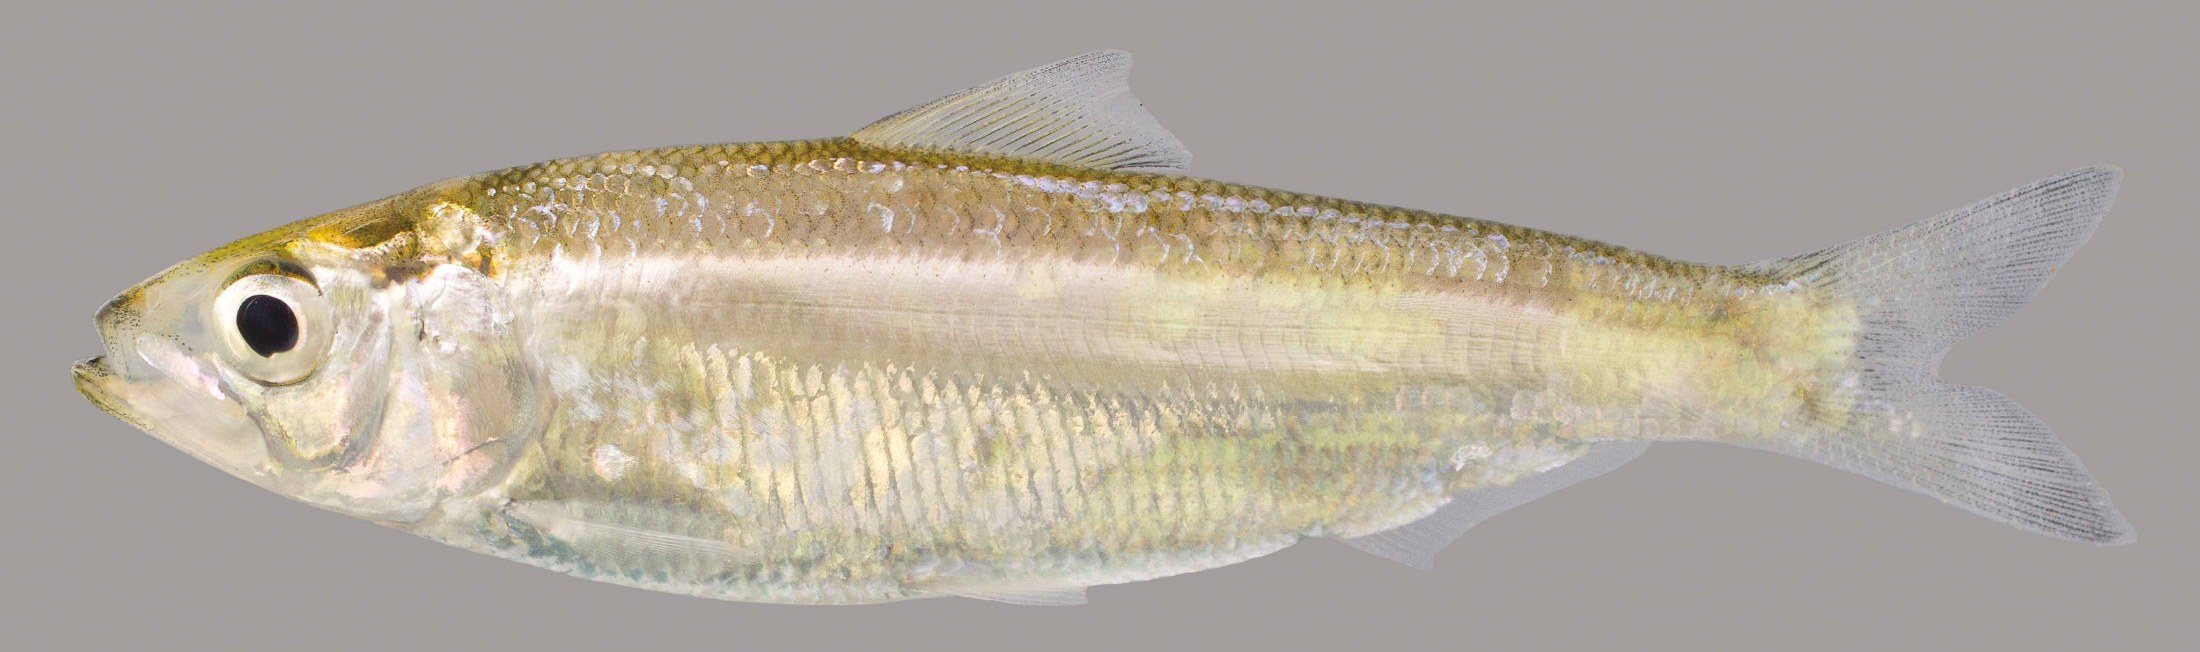 Lateral view of an Alabama shad